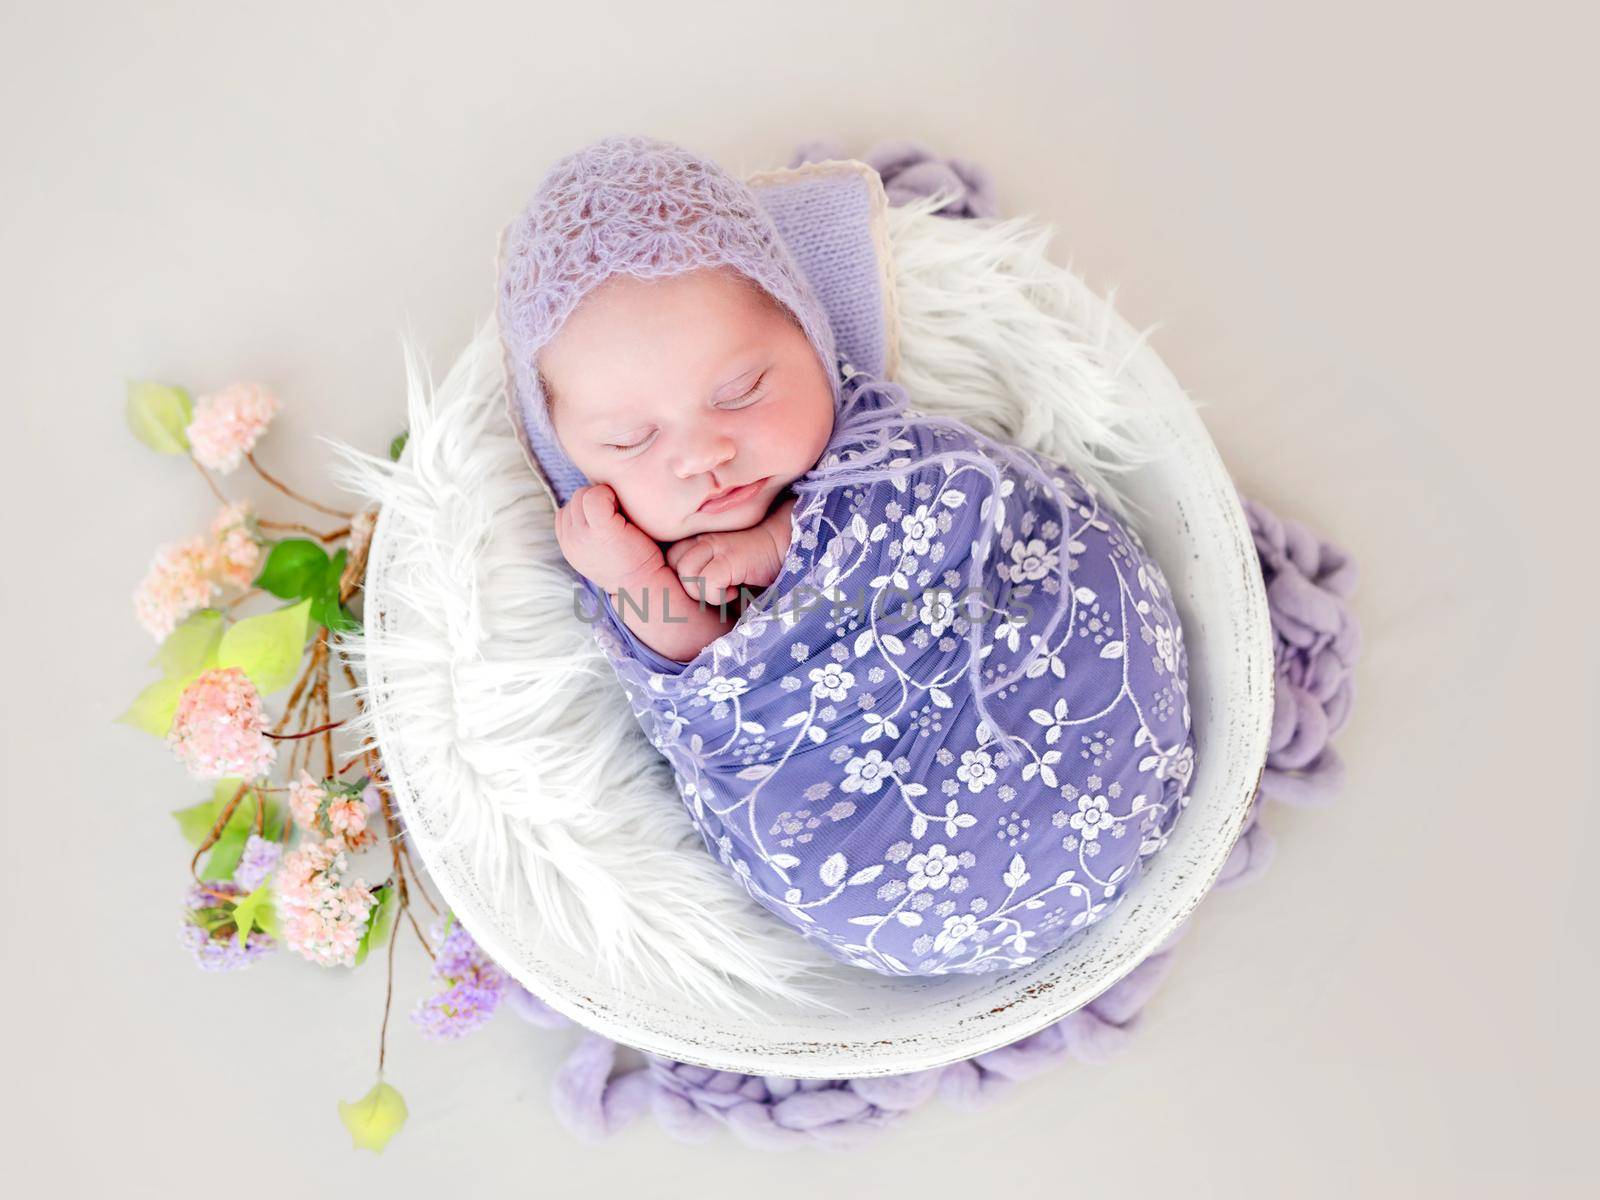 Newborn baby girl swaddled in beautiful fabric and wearing knitted hat sleeping in white basin. Little cute infant child napping lying on white fur. Adorable kid during studio photoshoot